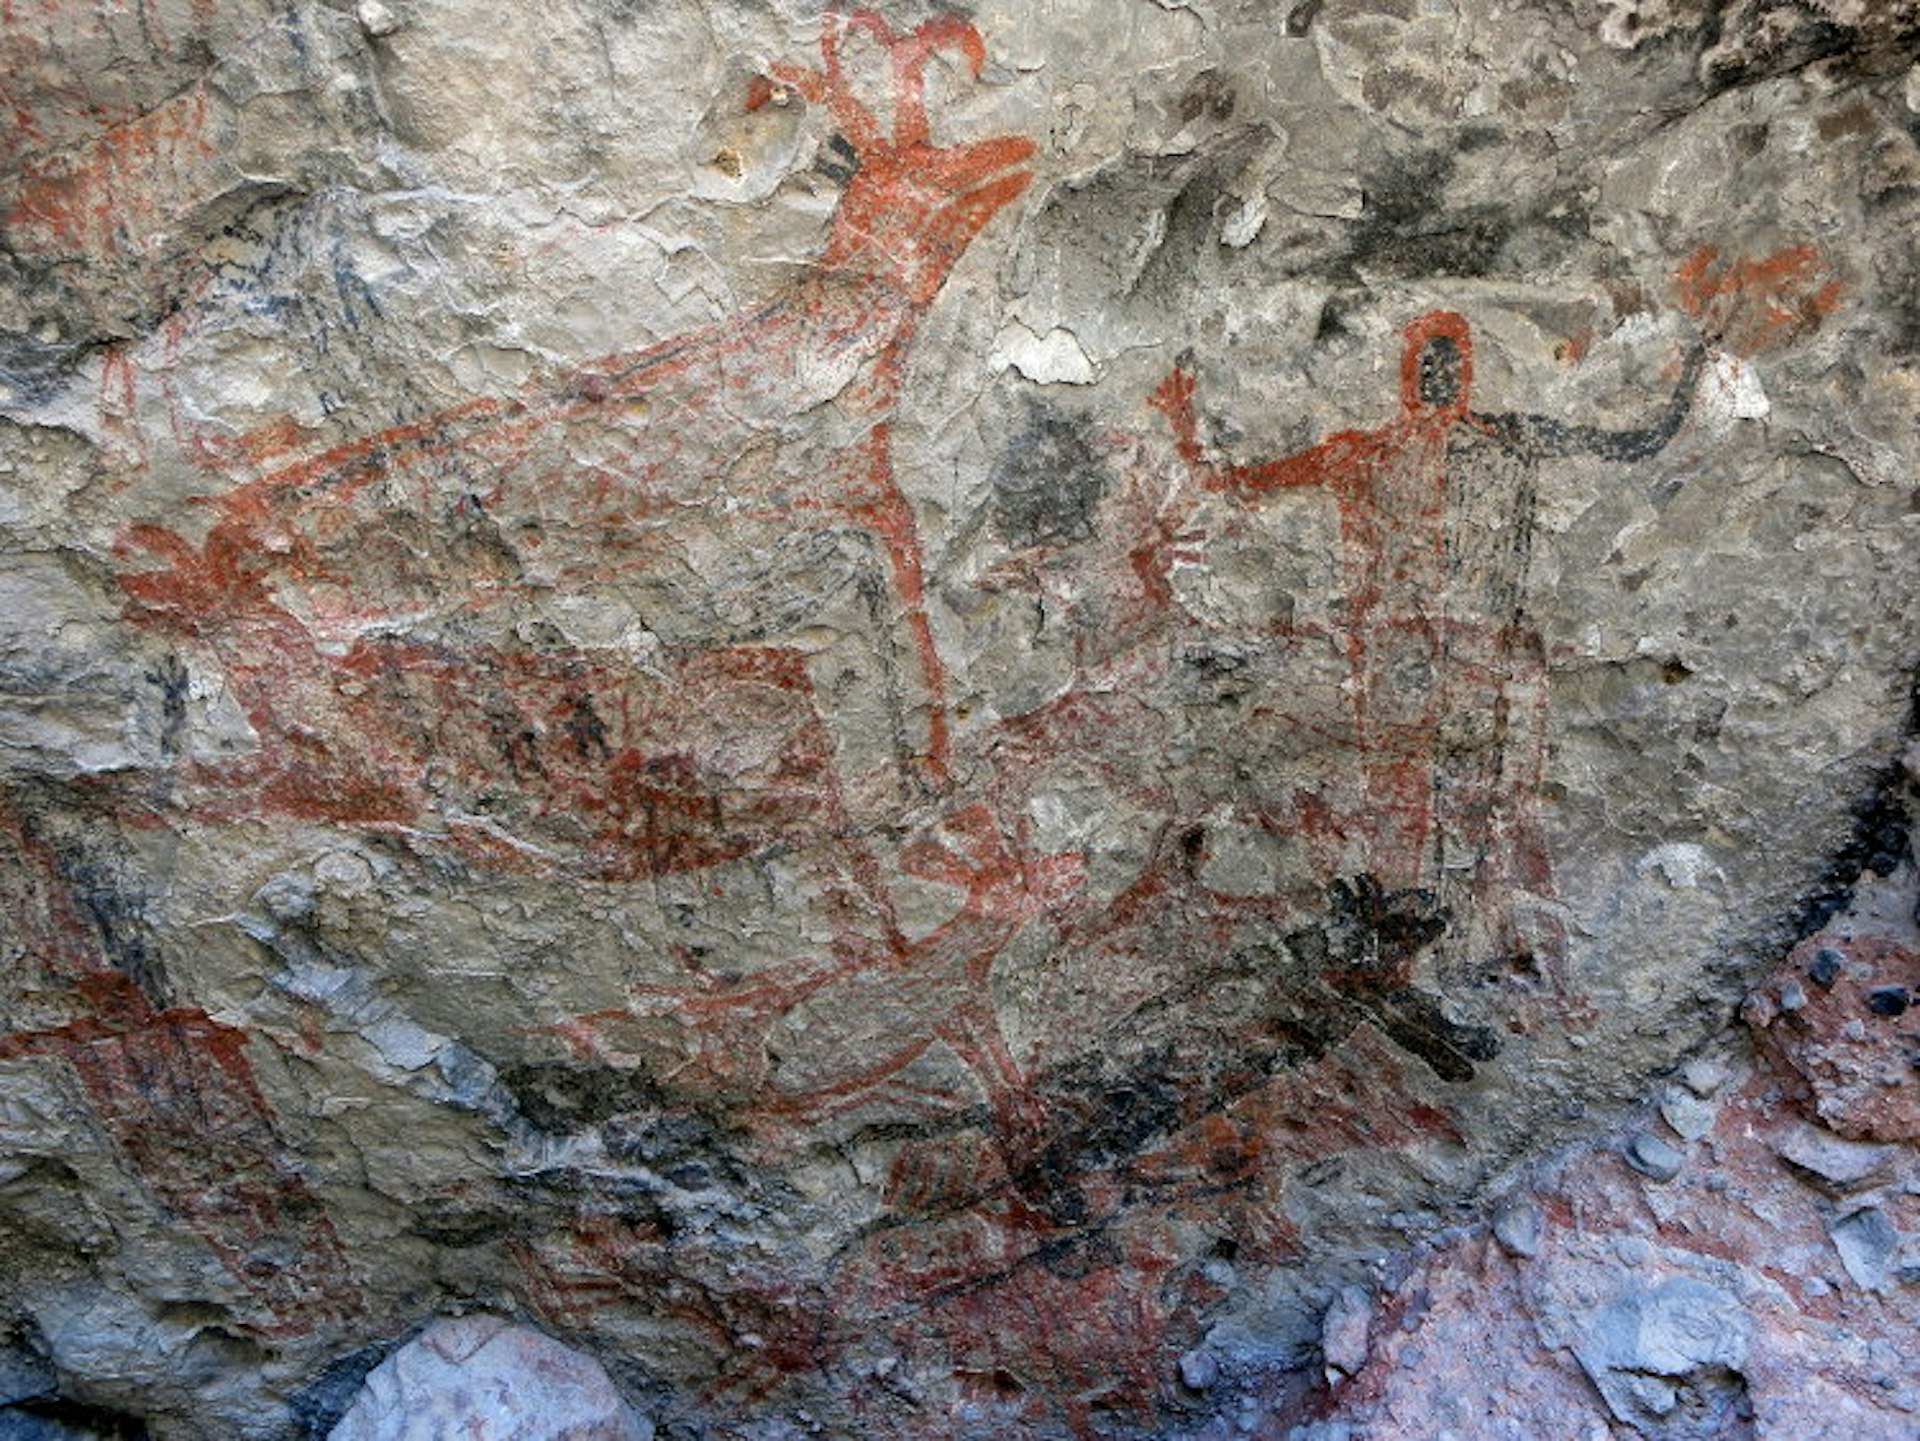 Local animals, shamanistic figures and a puma (not a mouse!) all feature in the Sierra de San Francisco's cave art. Image by Clifton Wilkinson / Lonely Planet